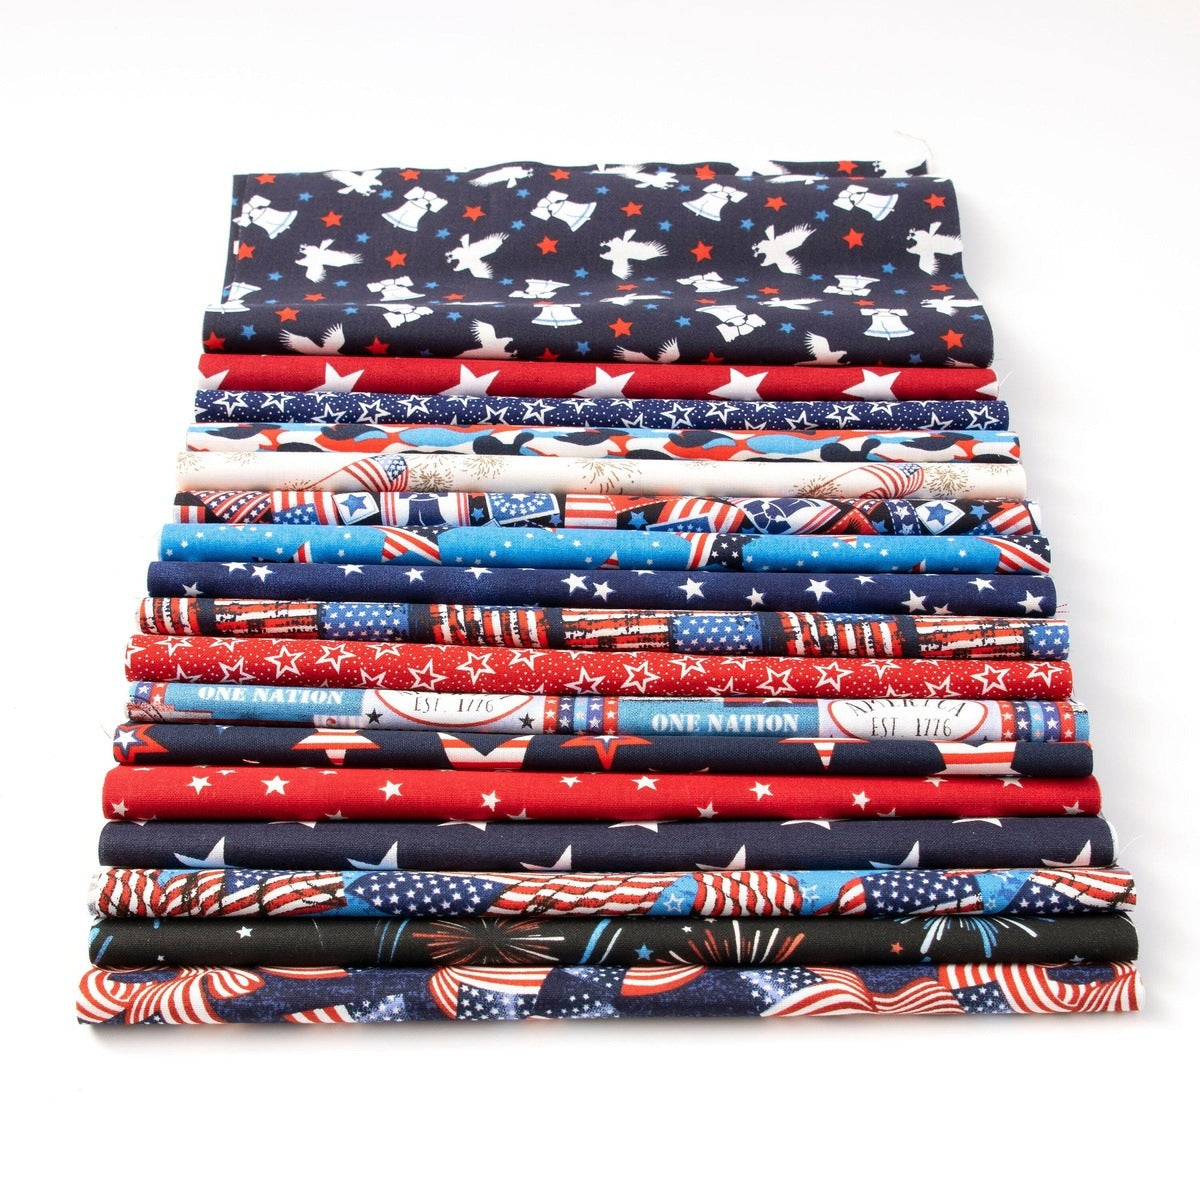 American Patriotic, quilt of valor, red white and blue 10 inch squares, pre cut quilt fabric 34 pieces